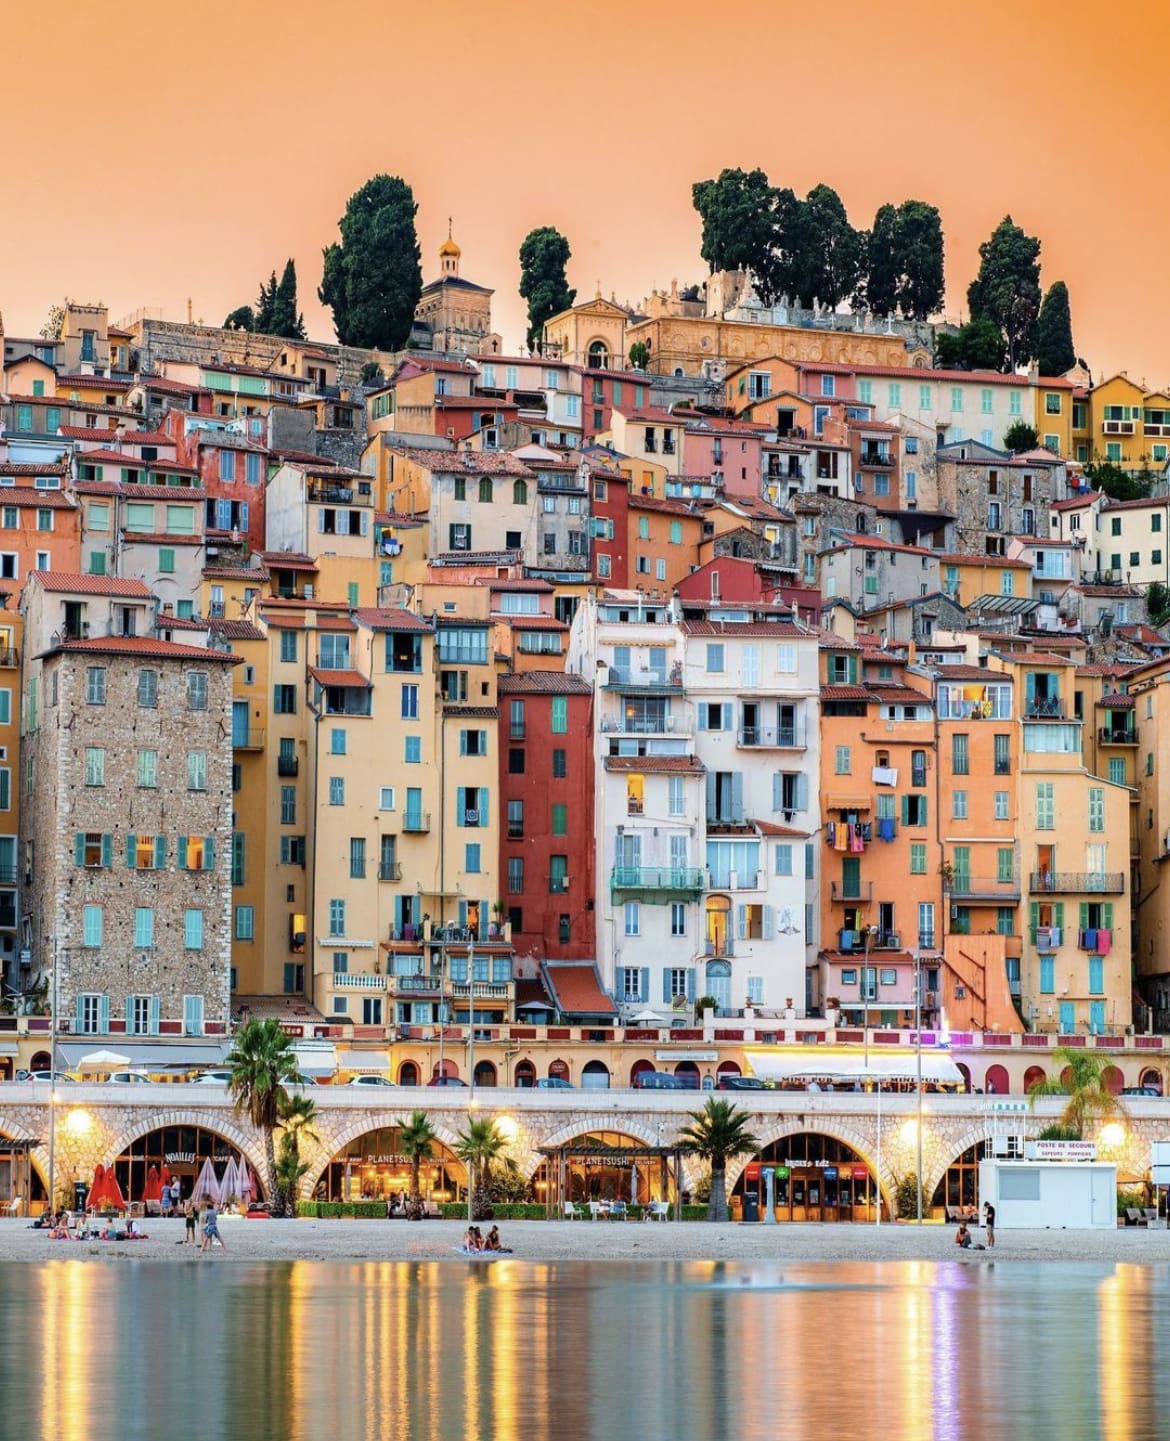 French Riviera, France - Where to Visit in Southern France